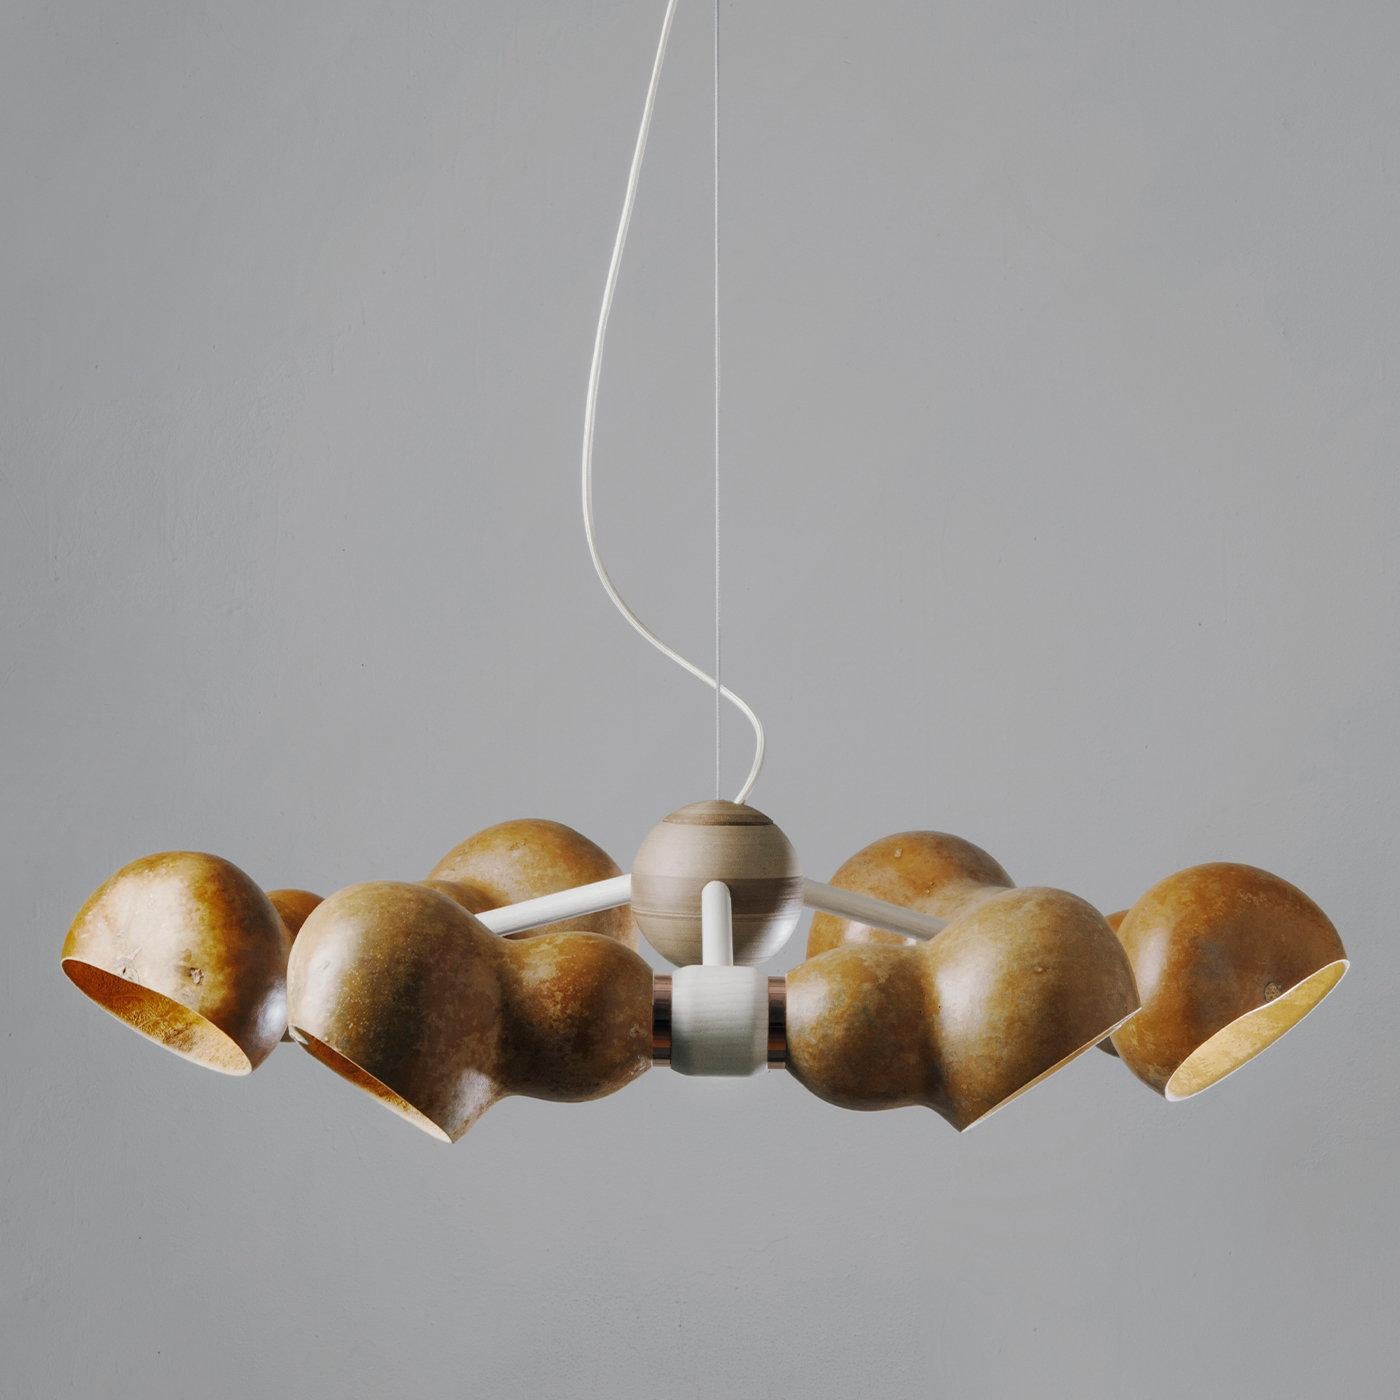 Bio Cloud is an elegant sustainable chandelier made of dried Lagenaria gourd that floats in the air like a cloud. From the 3D printed hemp heart of the lamp, three bows branch out creating a harmonious bond. This union gives a warm and singular